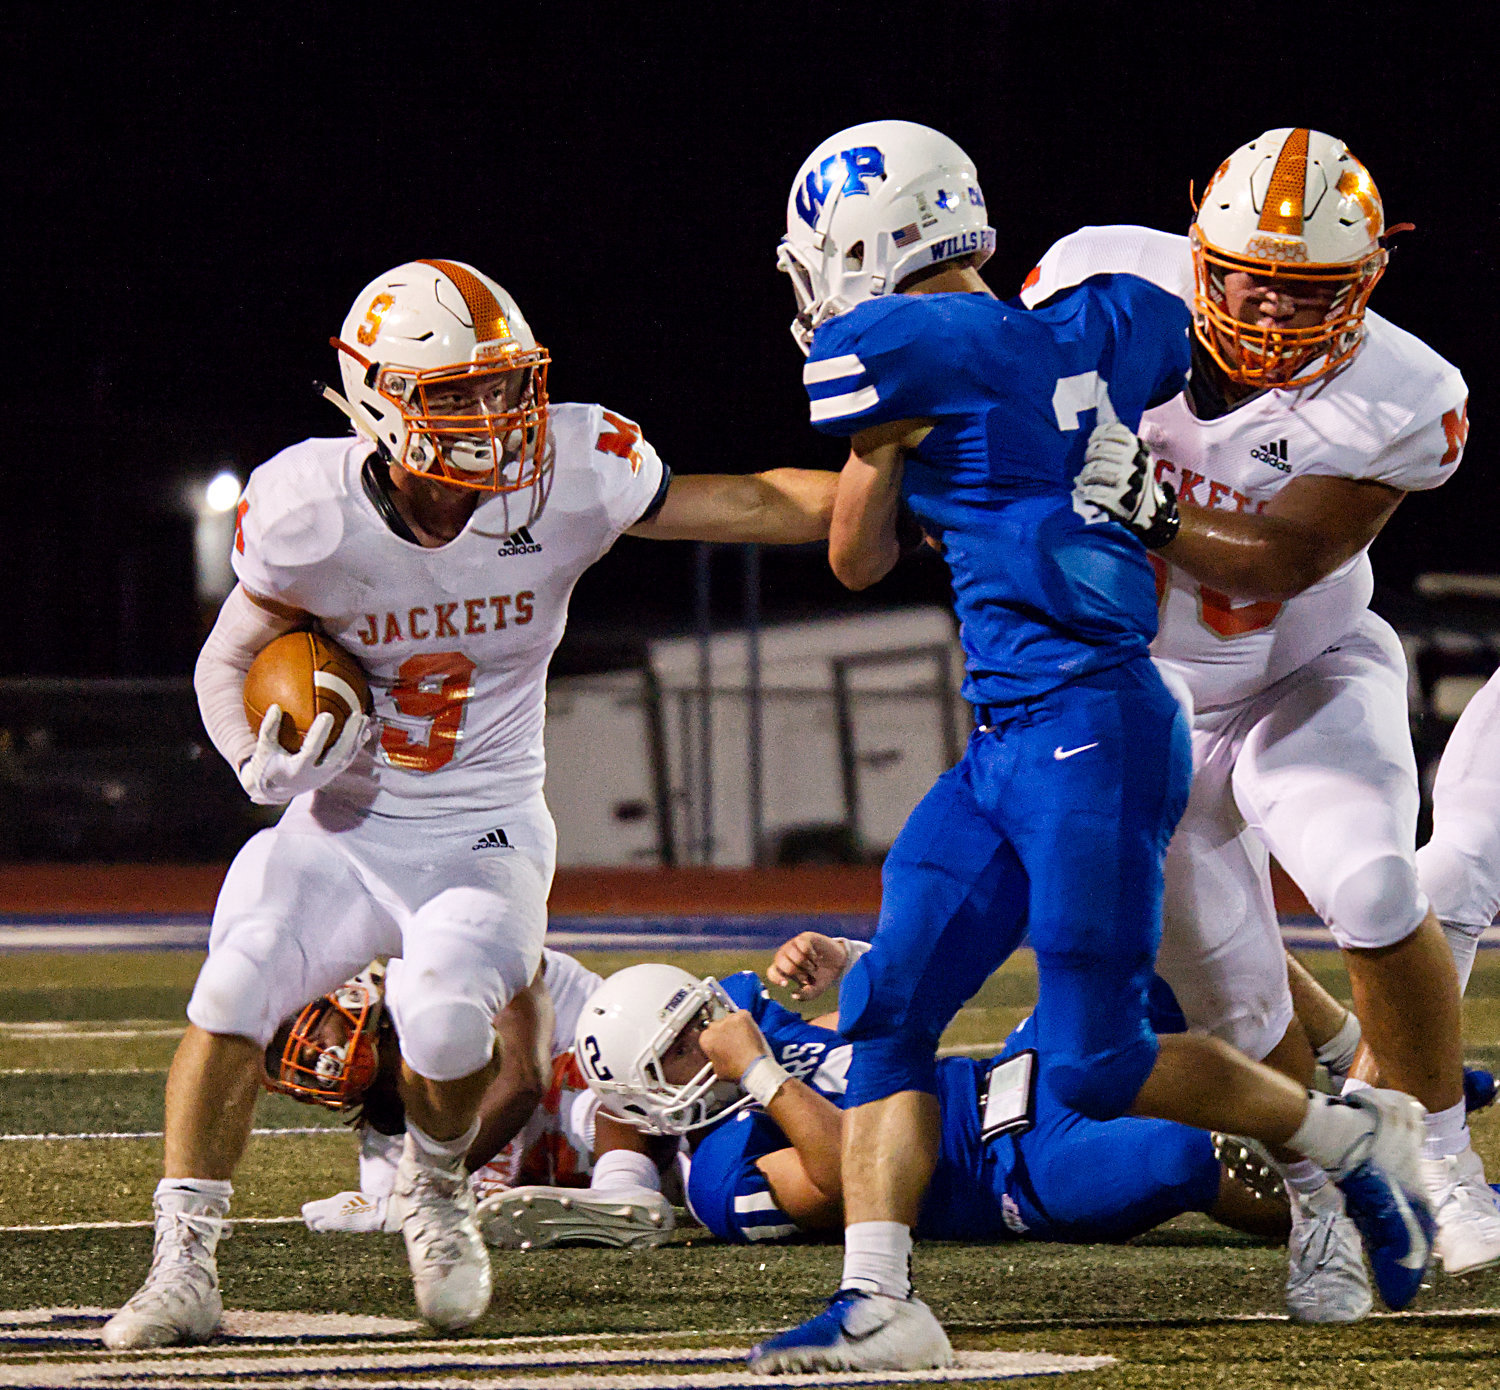 Mineola’s Cole Castleberry cuts back to follow the block.